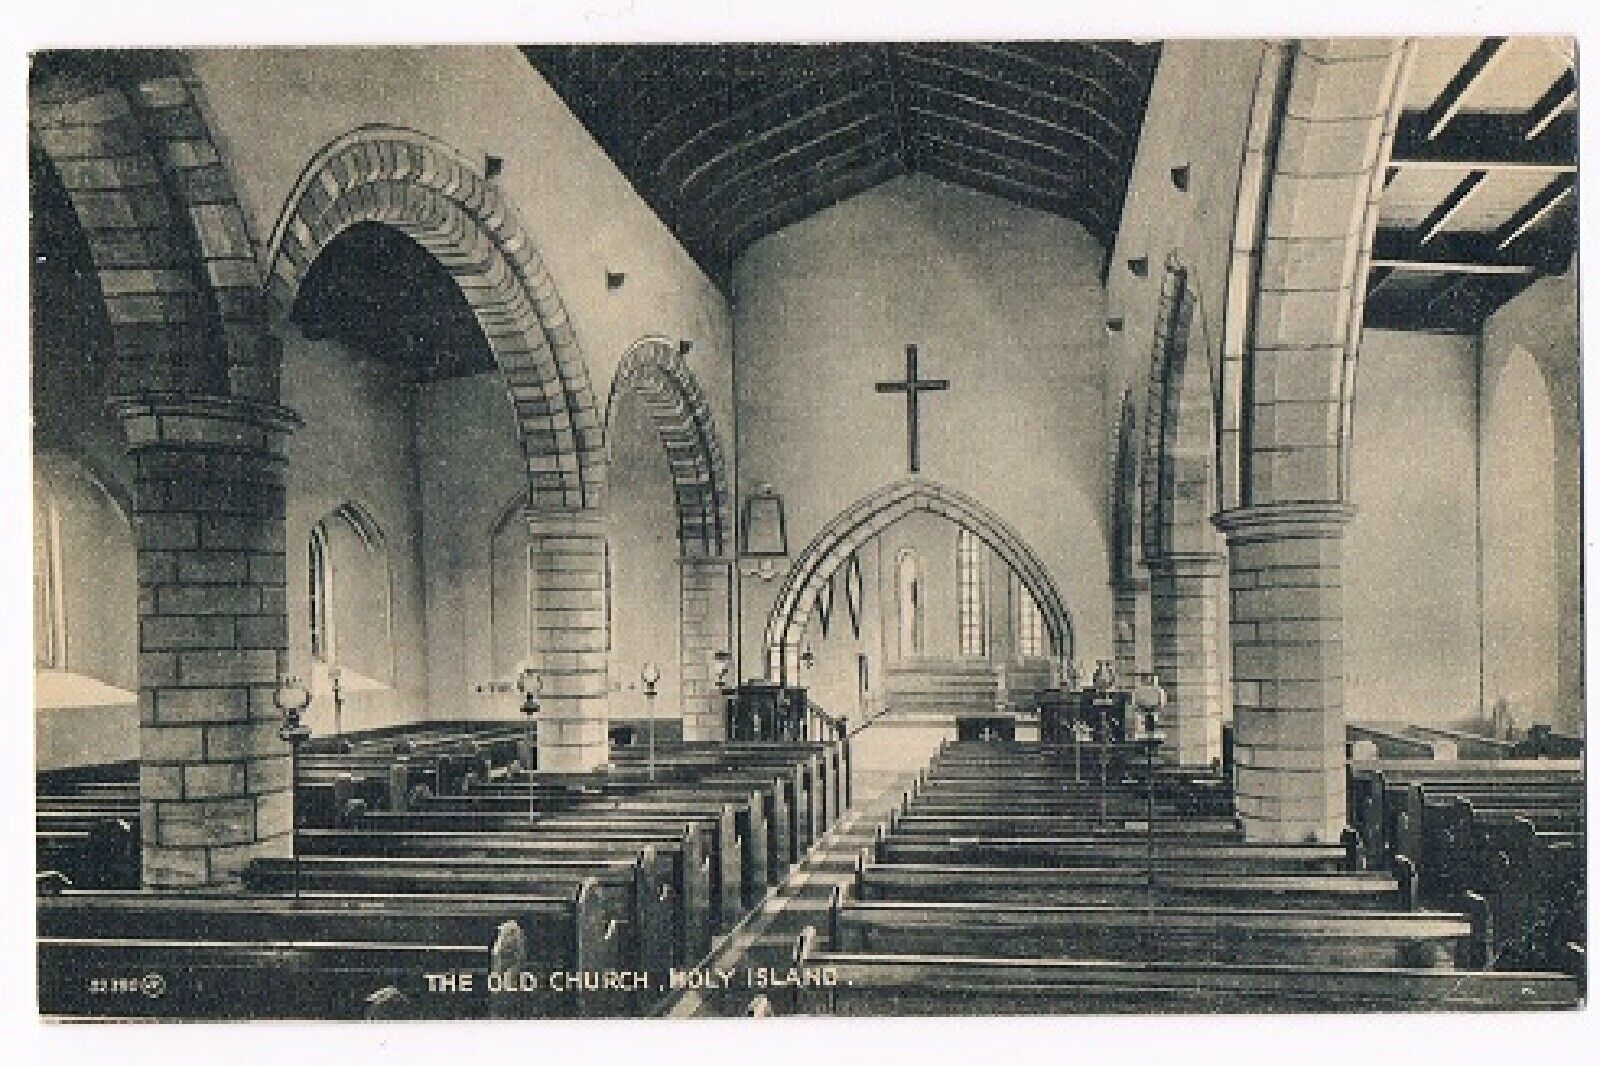 House Clearance - LINDISFARNE .  THE OLD CHURCH, HOLY ISLAND. NORTHUMBERLAND. OLD POSTCARD